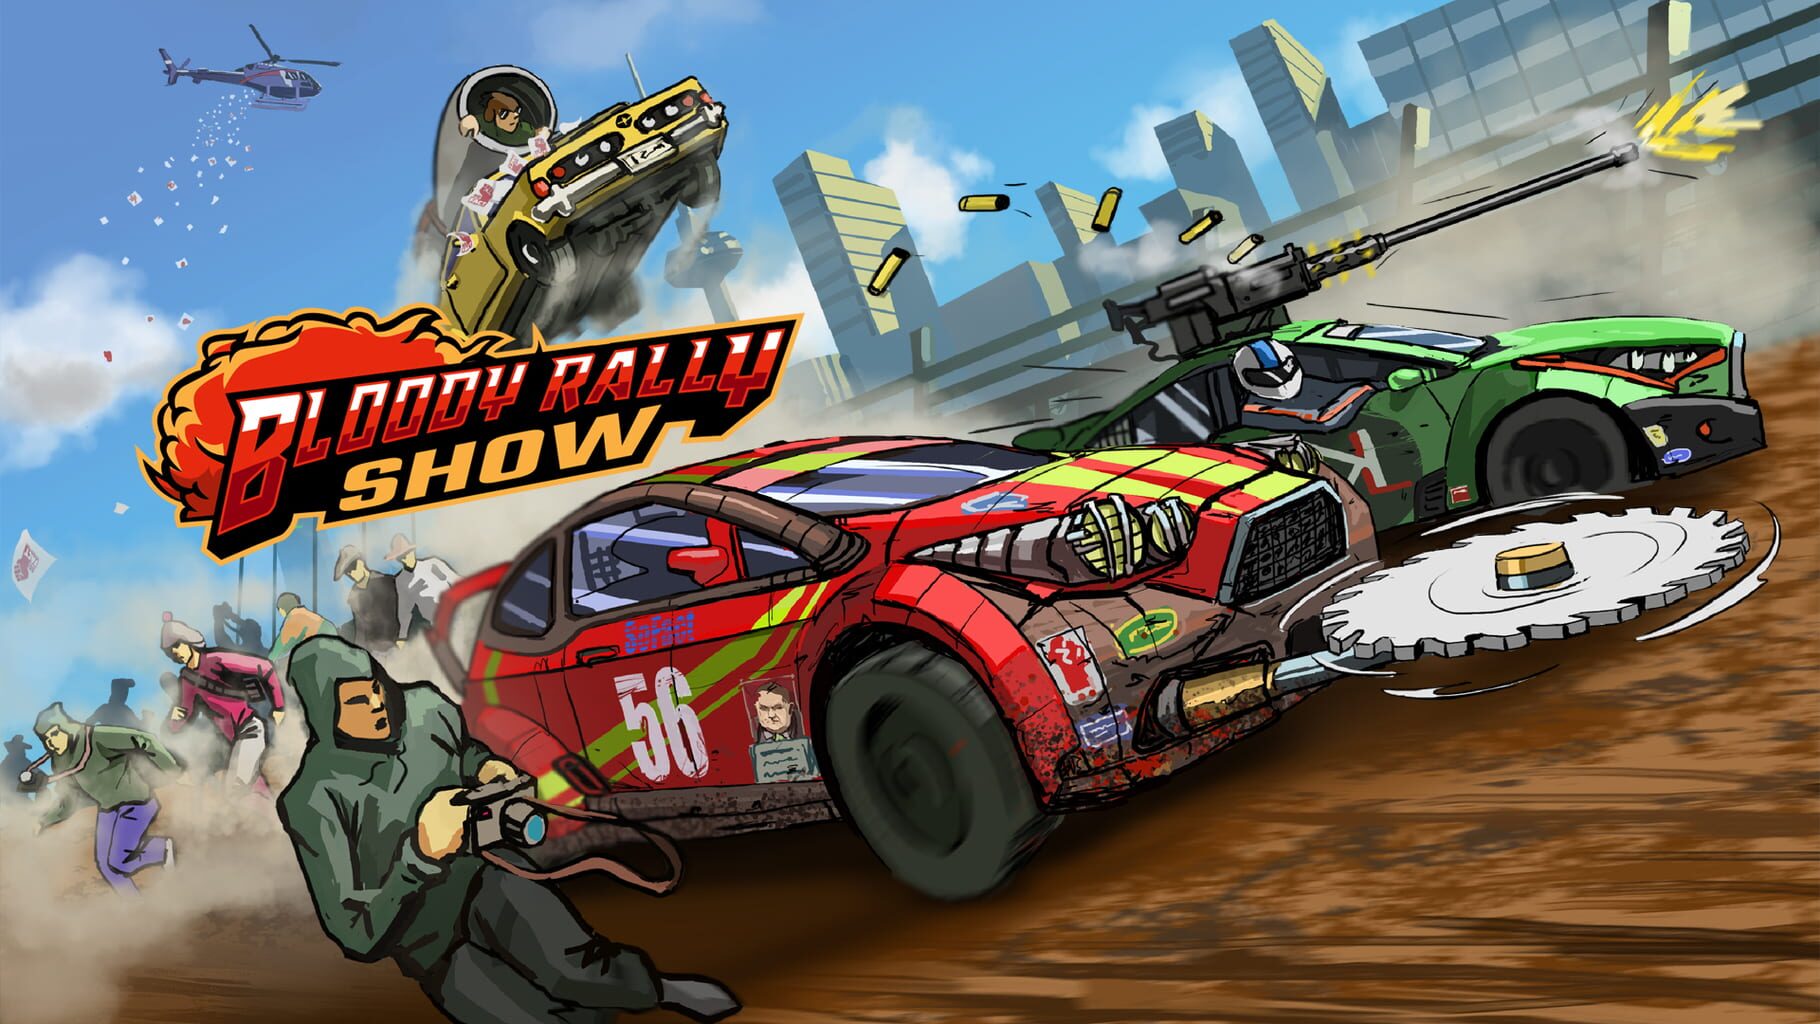 Bloody Rally Show artwork